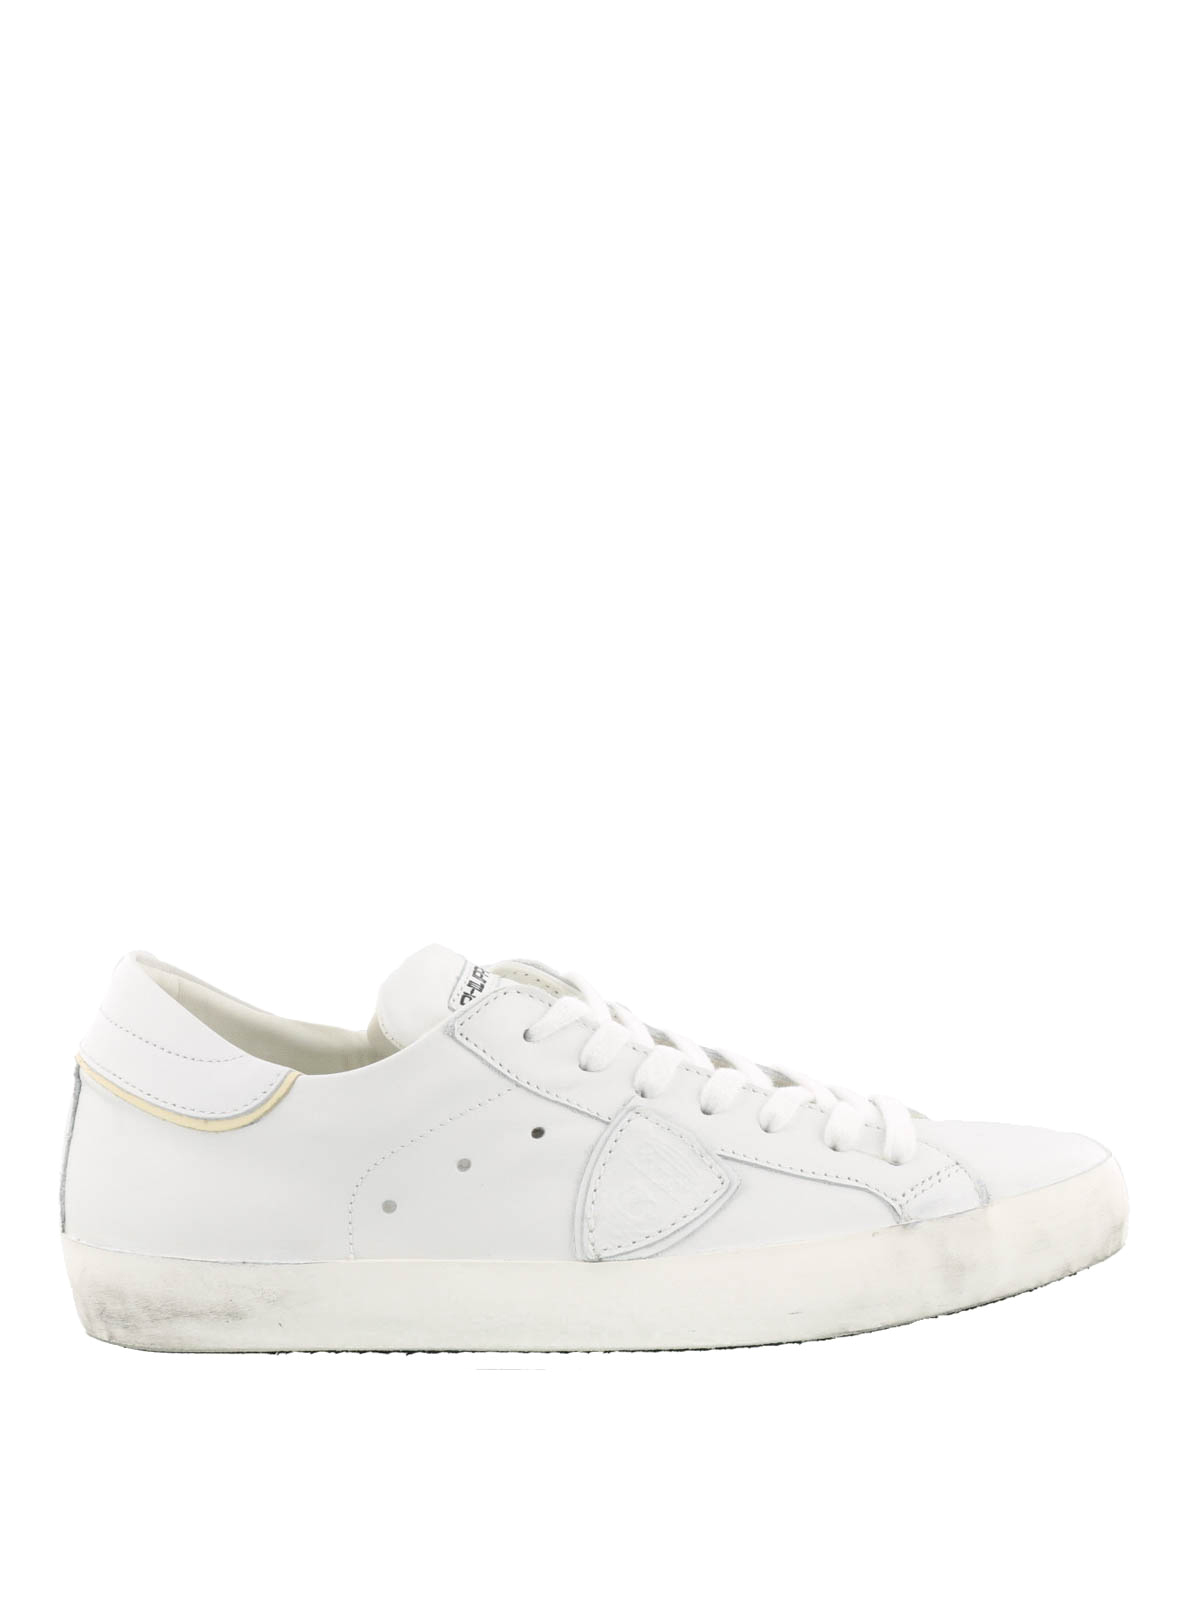 Philippe Model - Sneaker Paris bianche - sneakers - CLLUVB05 | iKRIX.com